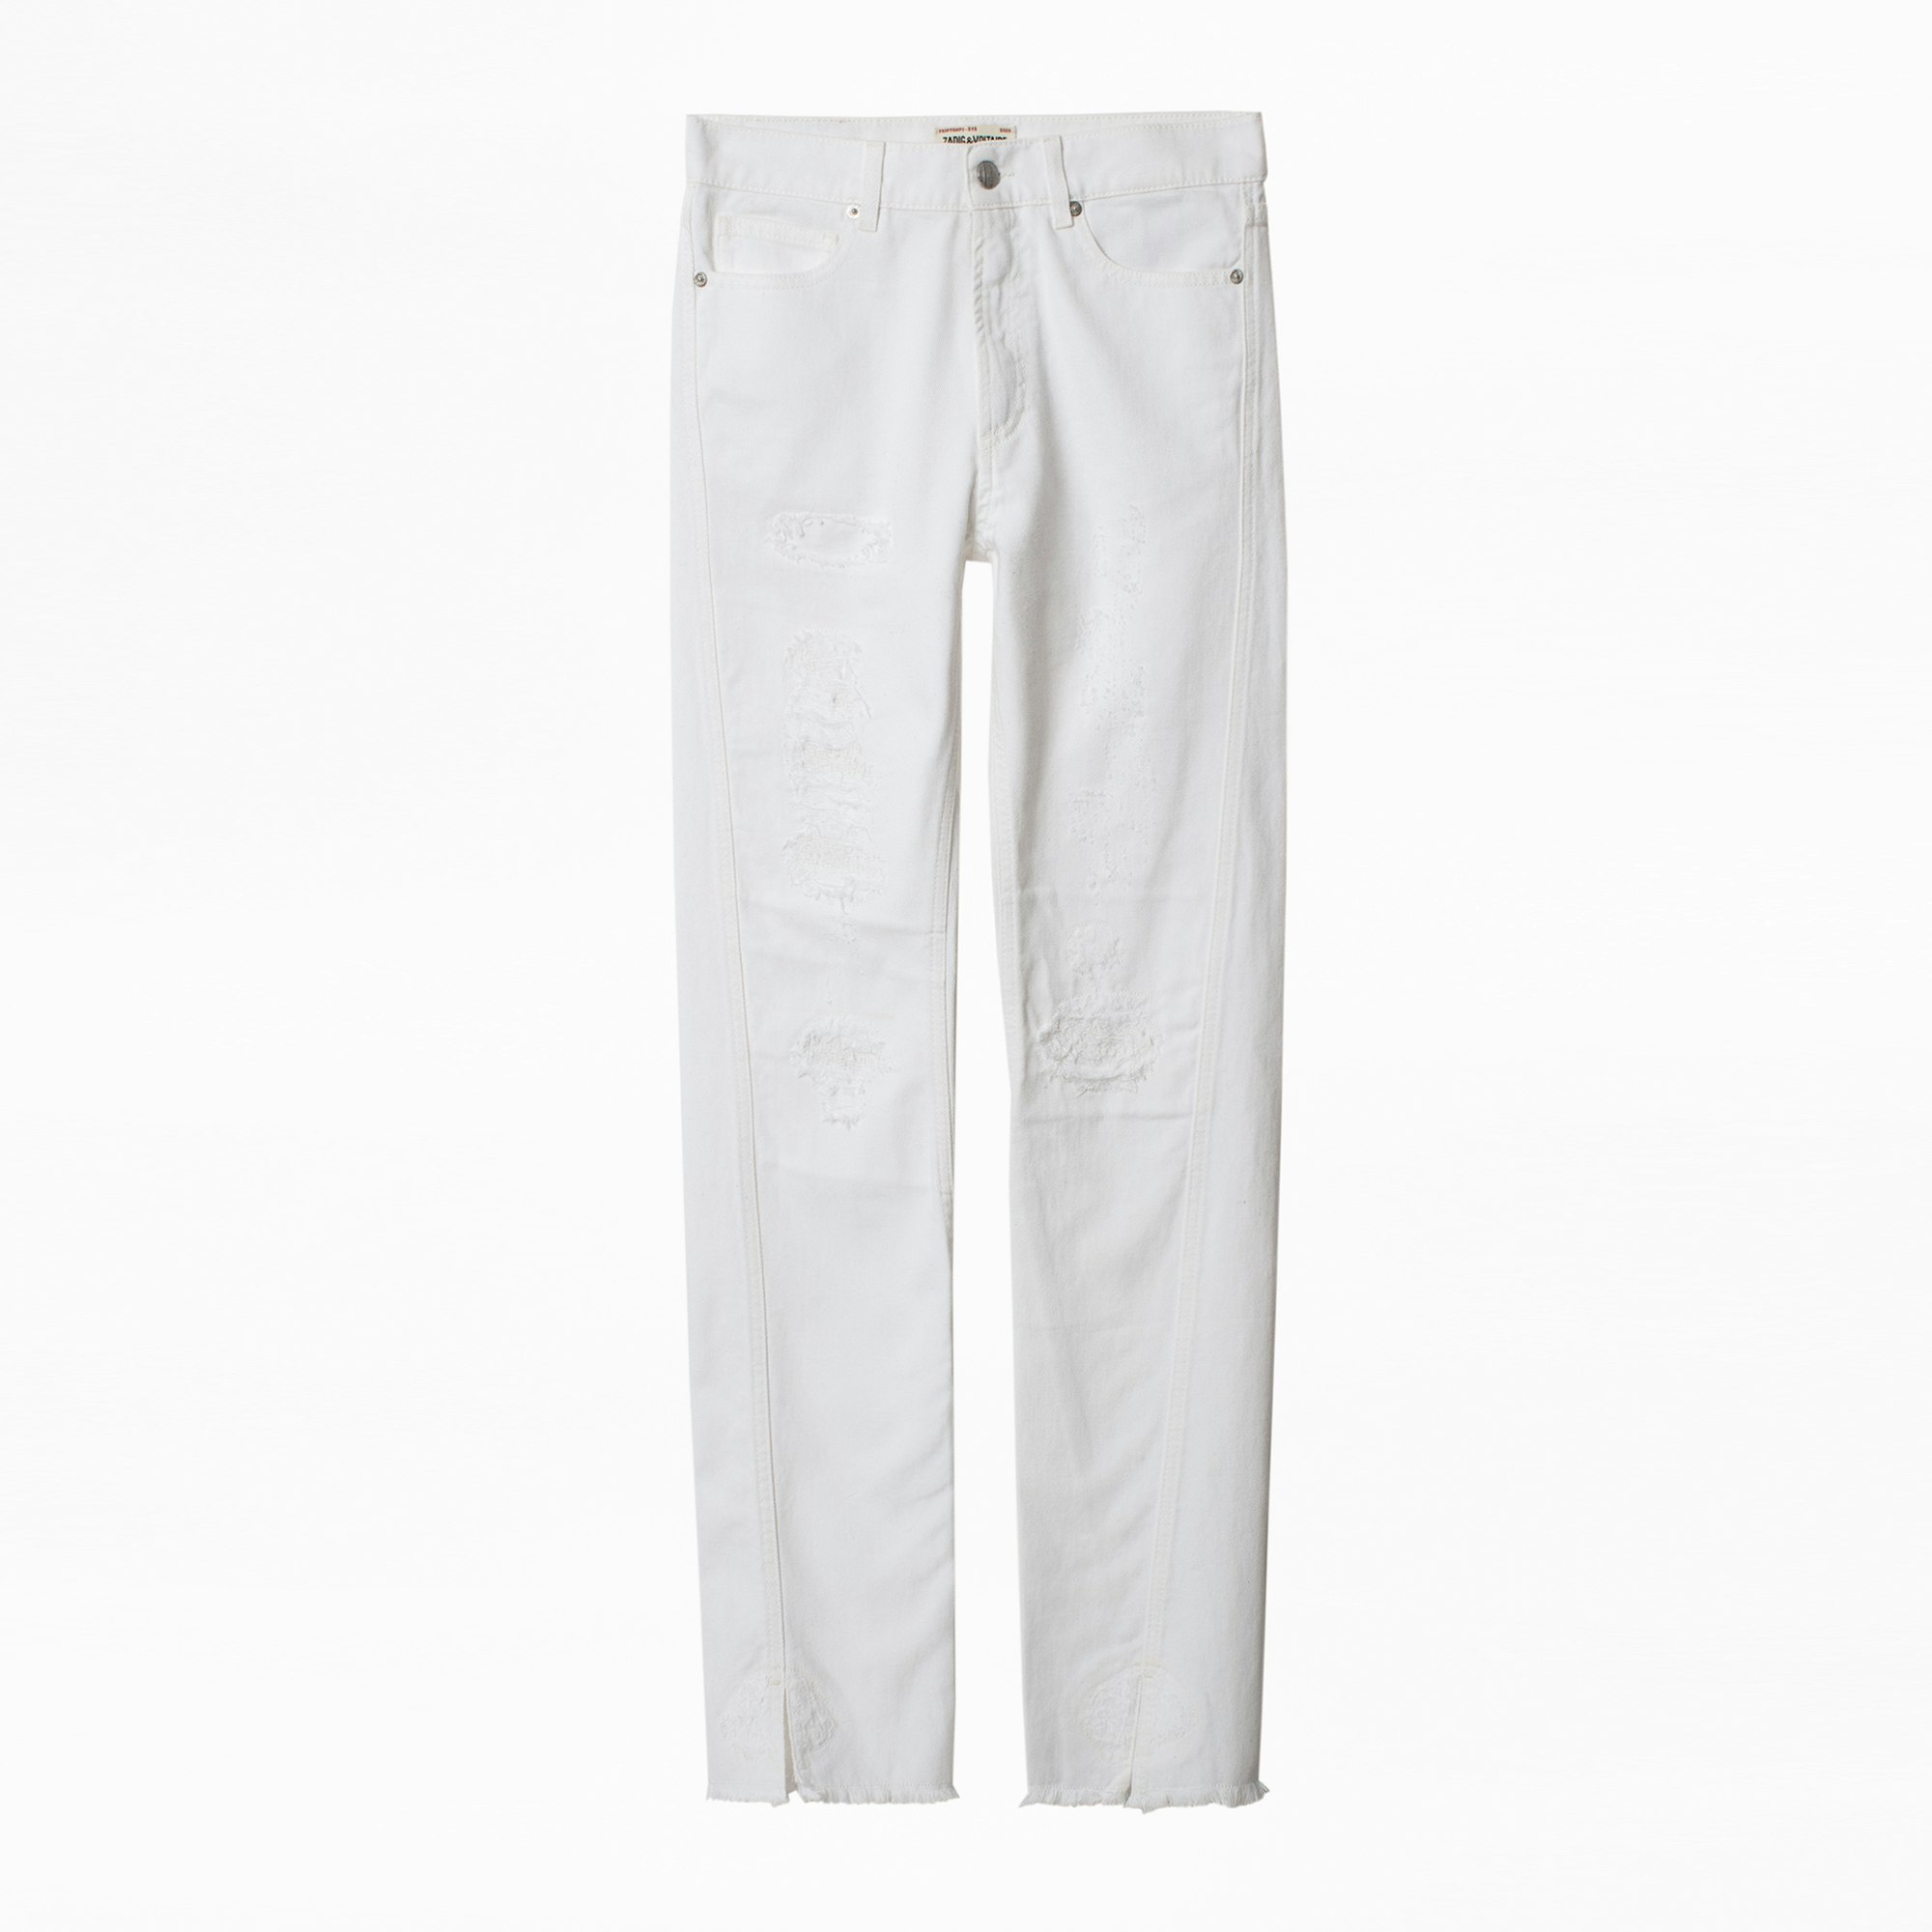 Erini Jeans Women’s white jeans with used effect.